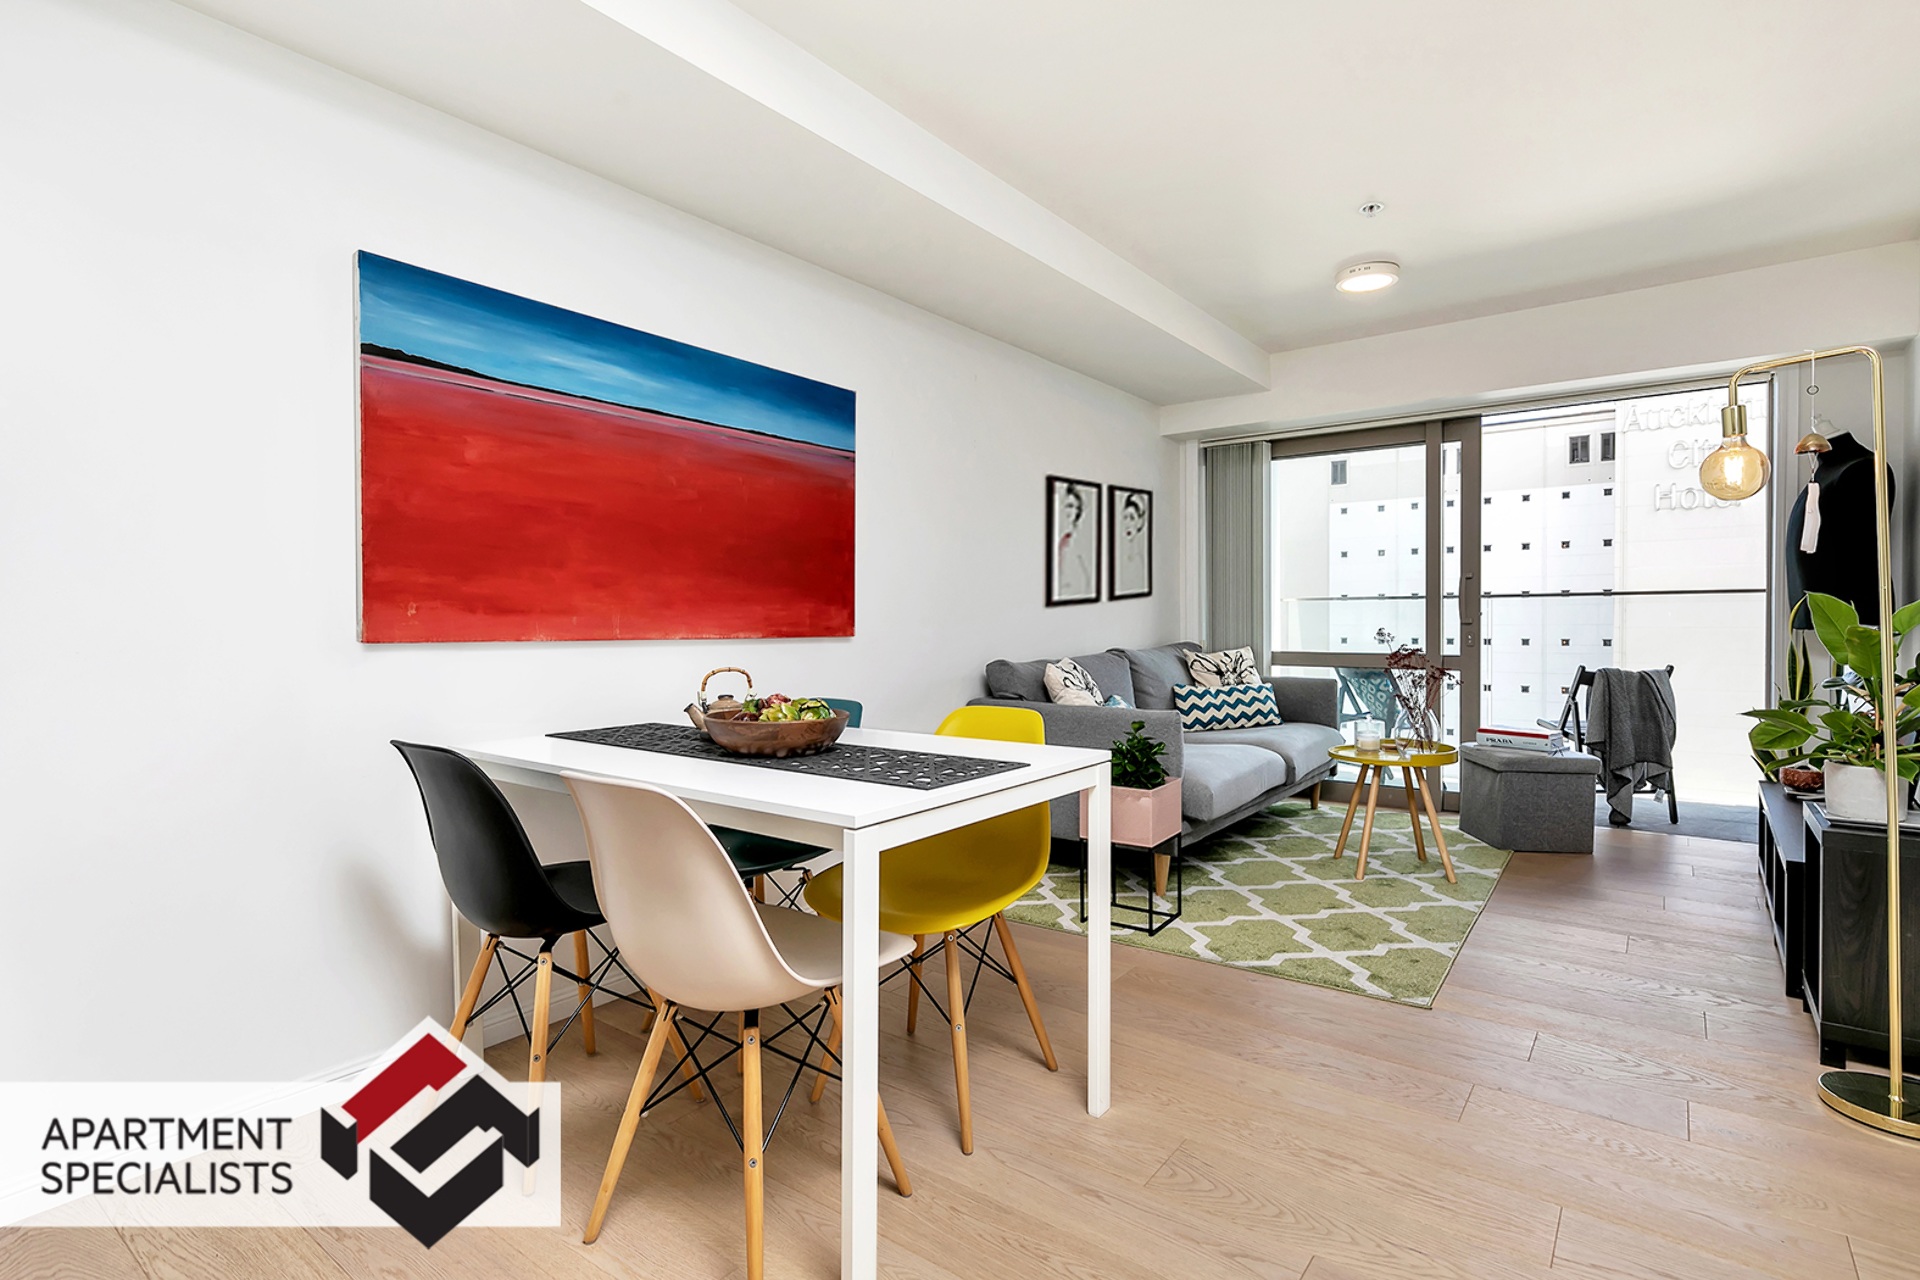 6 | 168 Hobson Street, City Centre | Apartment Specialists